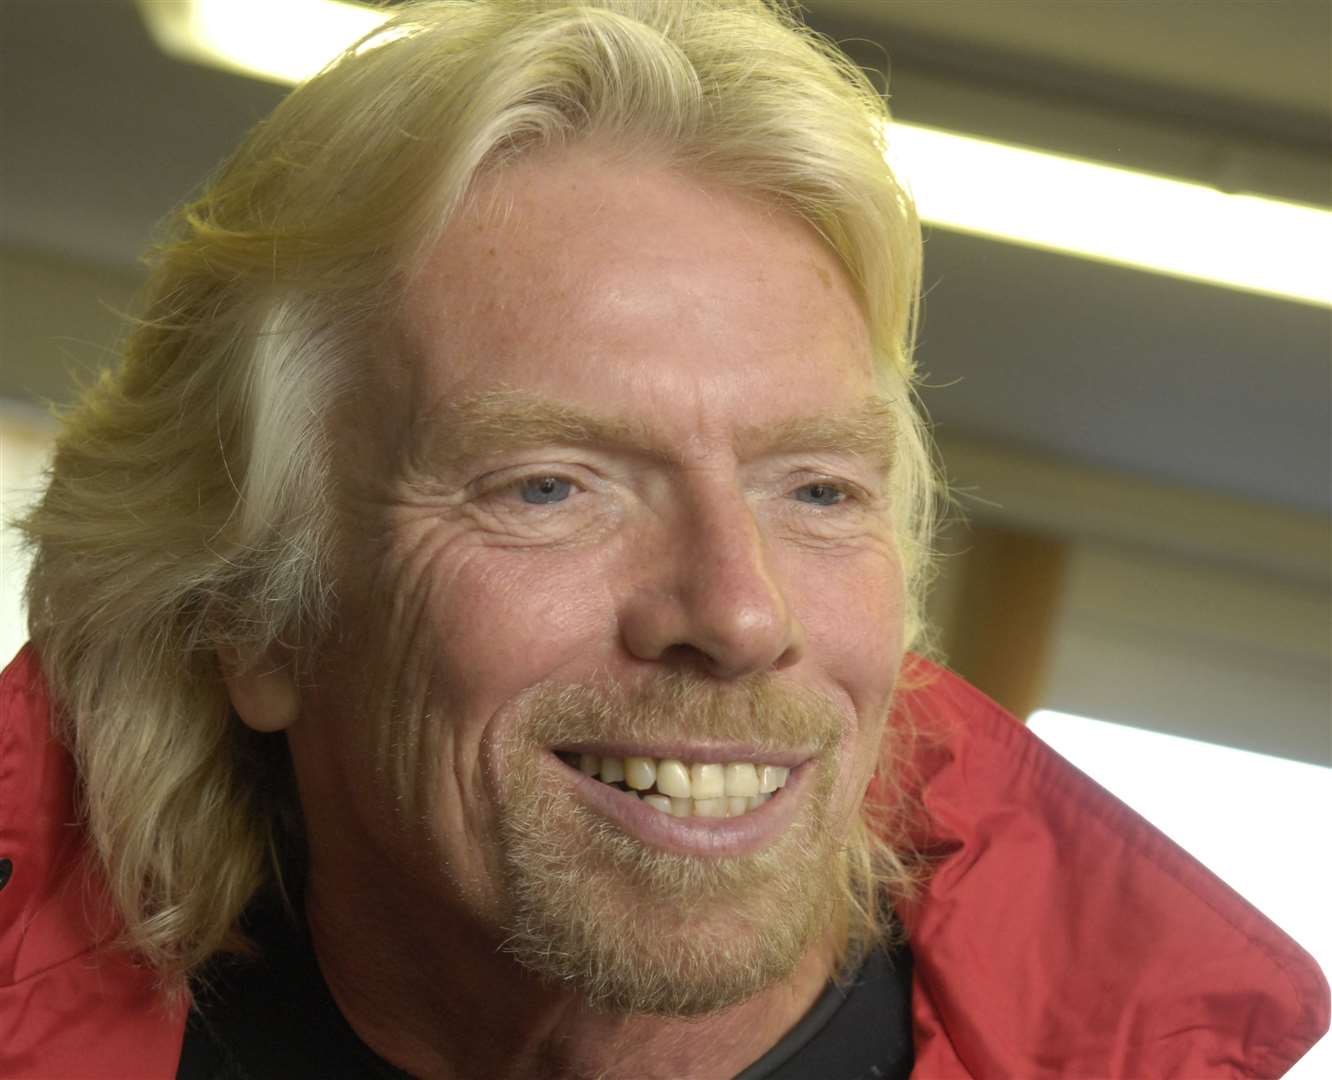 Richard Branson introduced unlimited holiday to Virgin Management in 2014